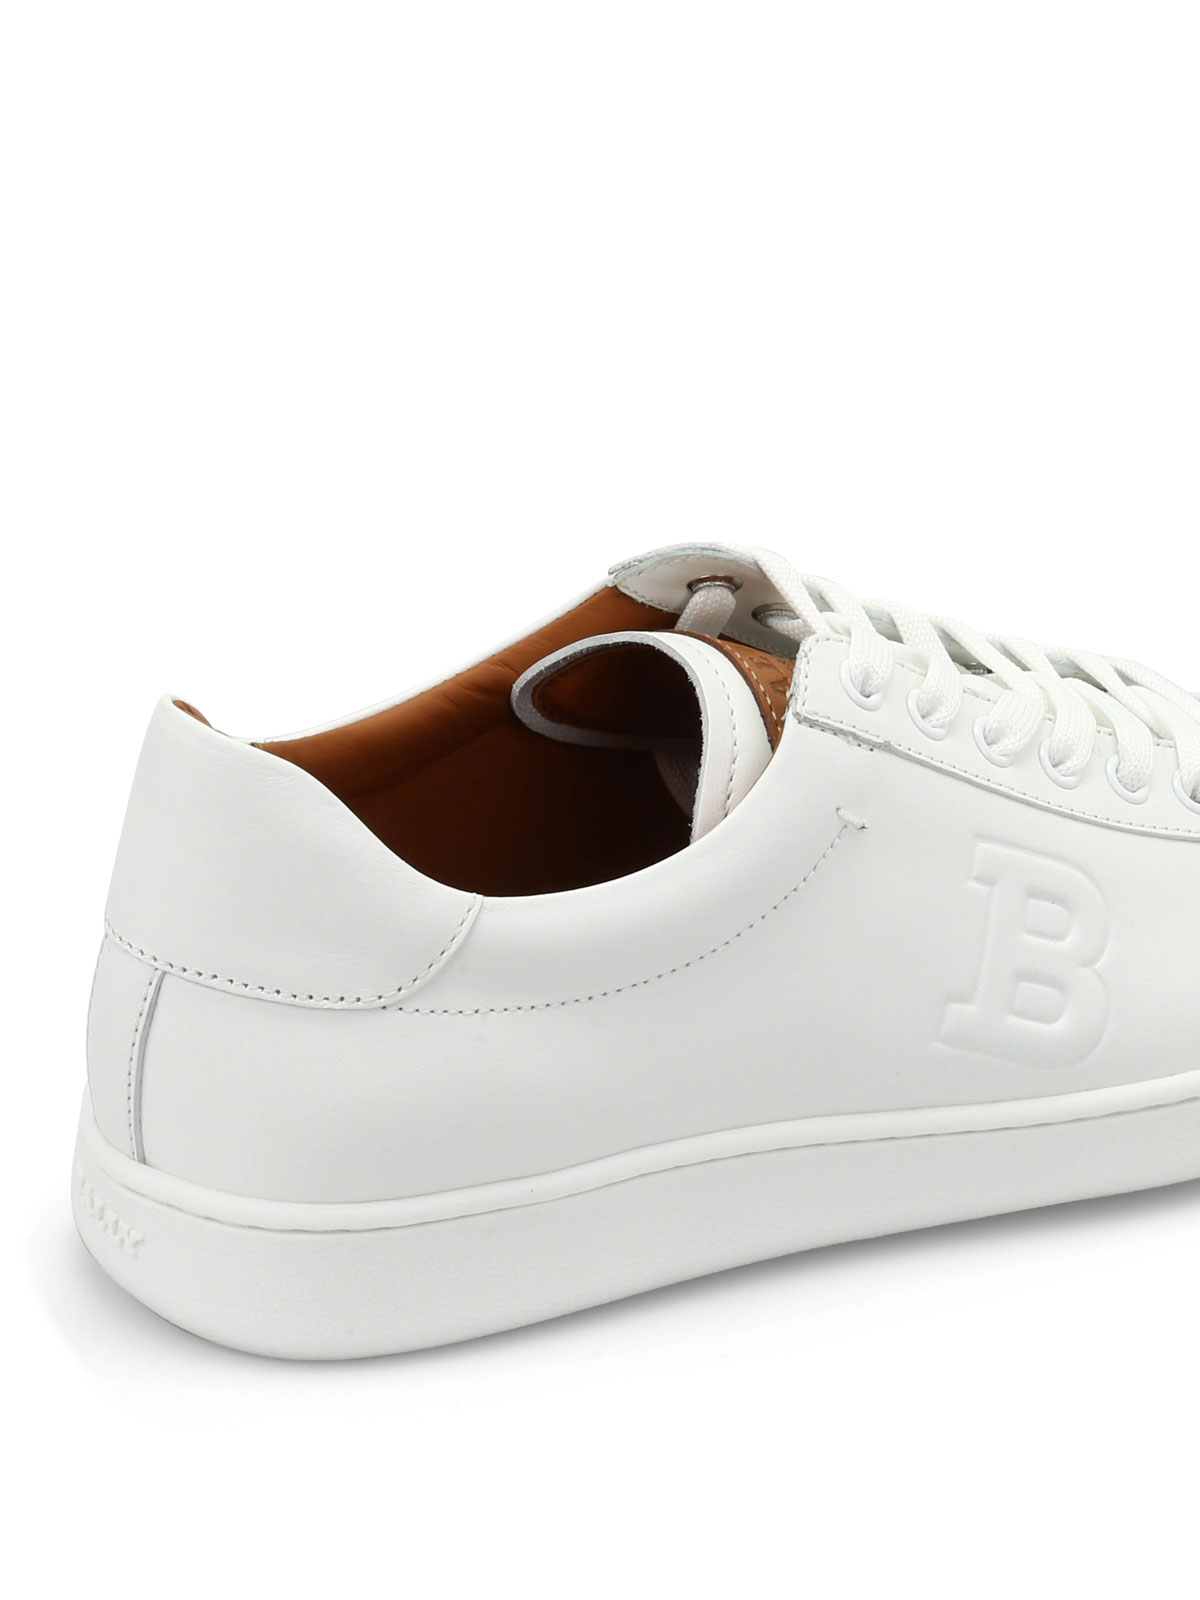 Litoral Rechazar Oso Trainers Bally - Leather sneakers - ASHER07 | Shop online at iKRIX